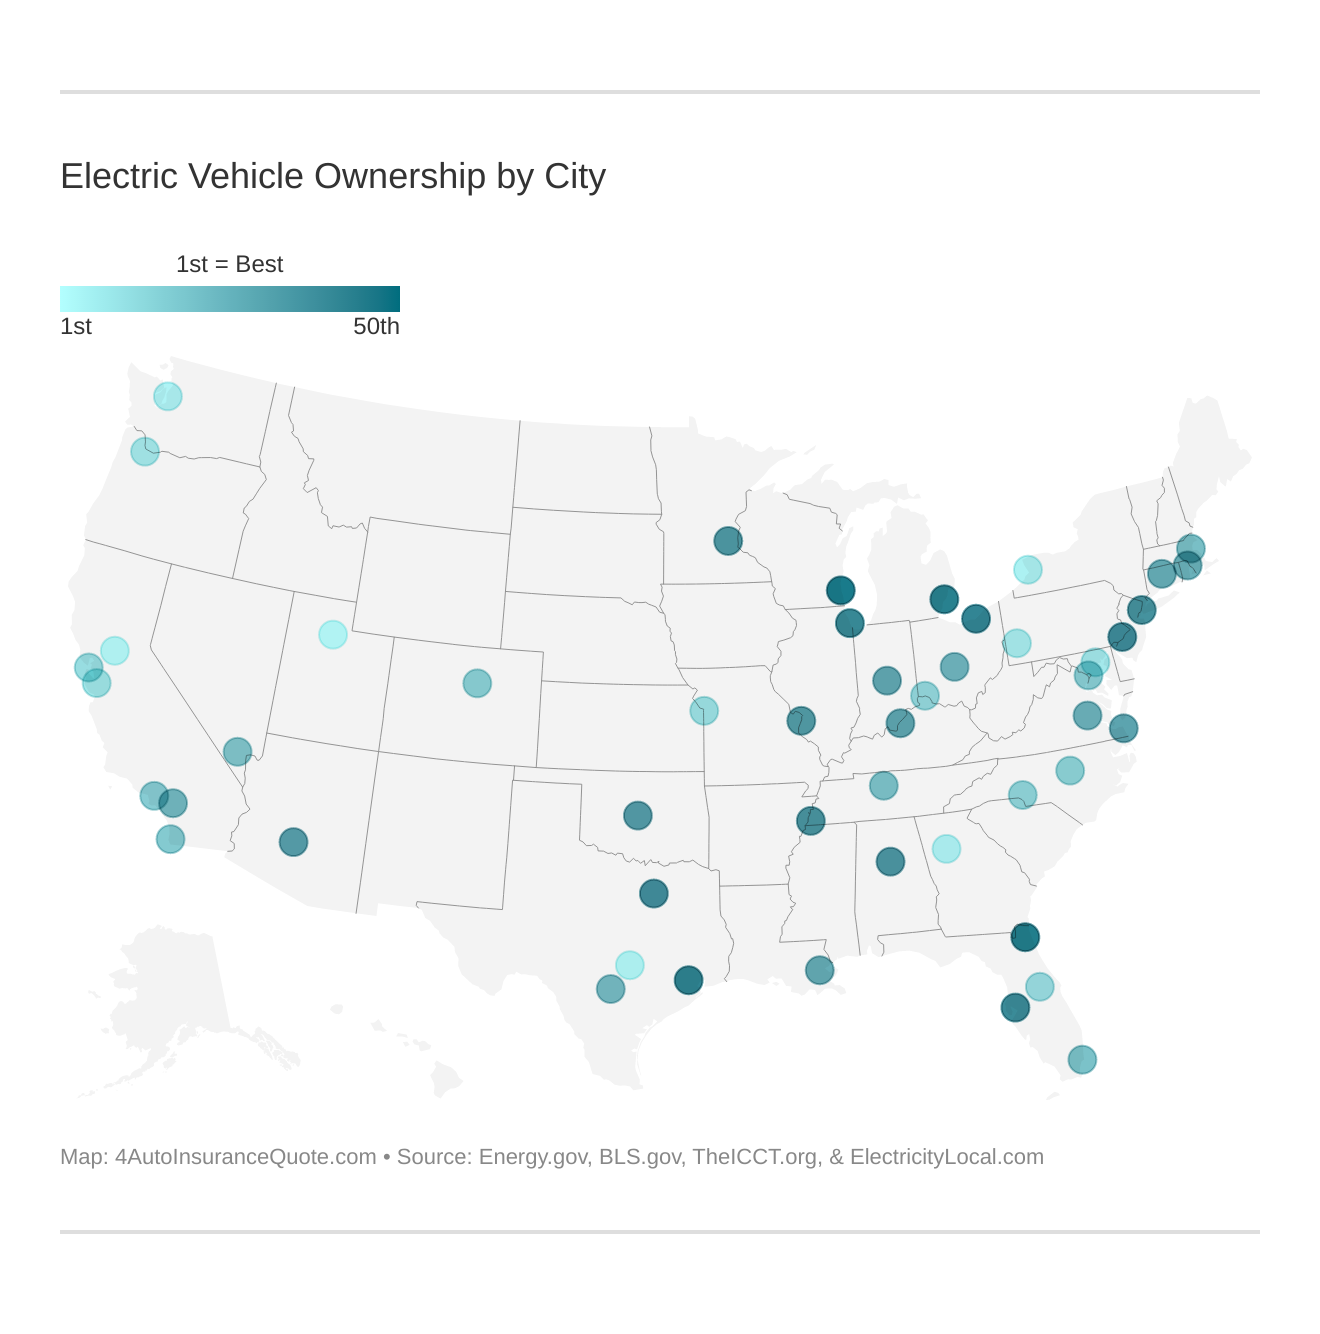 Electric Vehicle Ownership by City